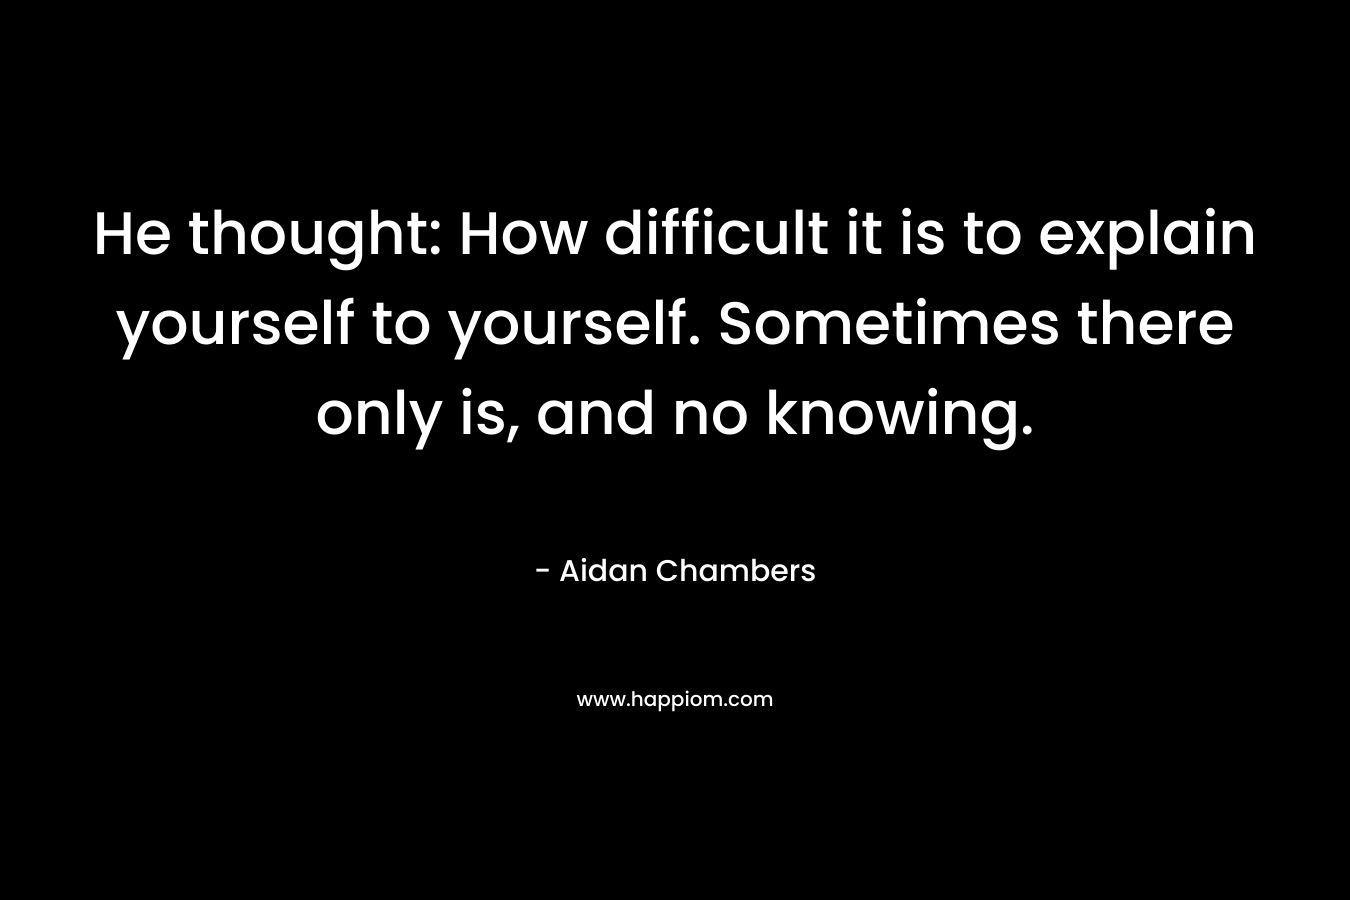 He thought: How difficult it is to explain yourself to yourself. Sometimes there only is, and no knowing. – Aidan Chambers